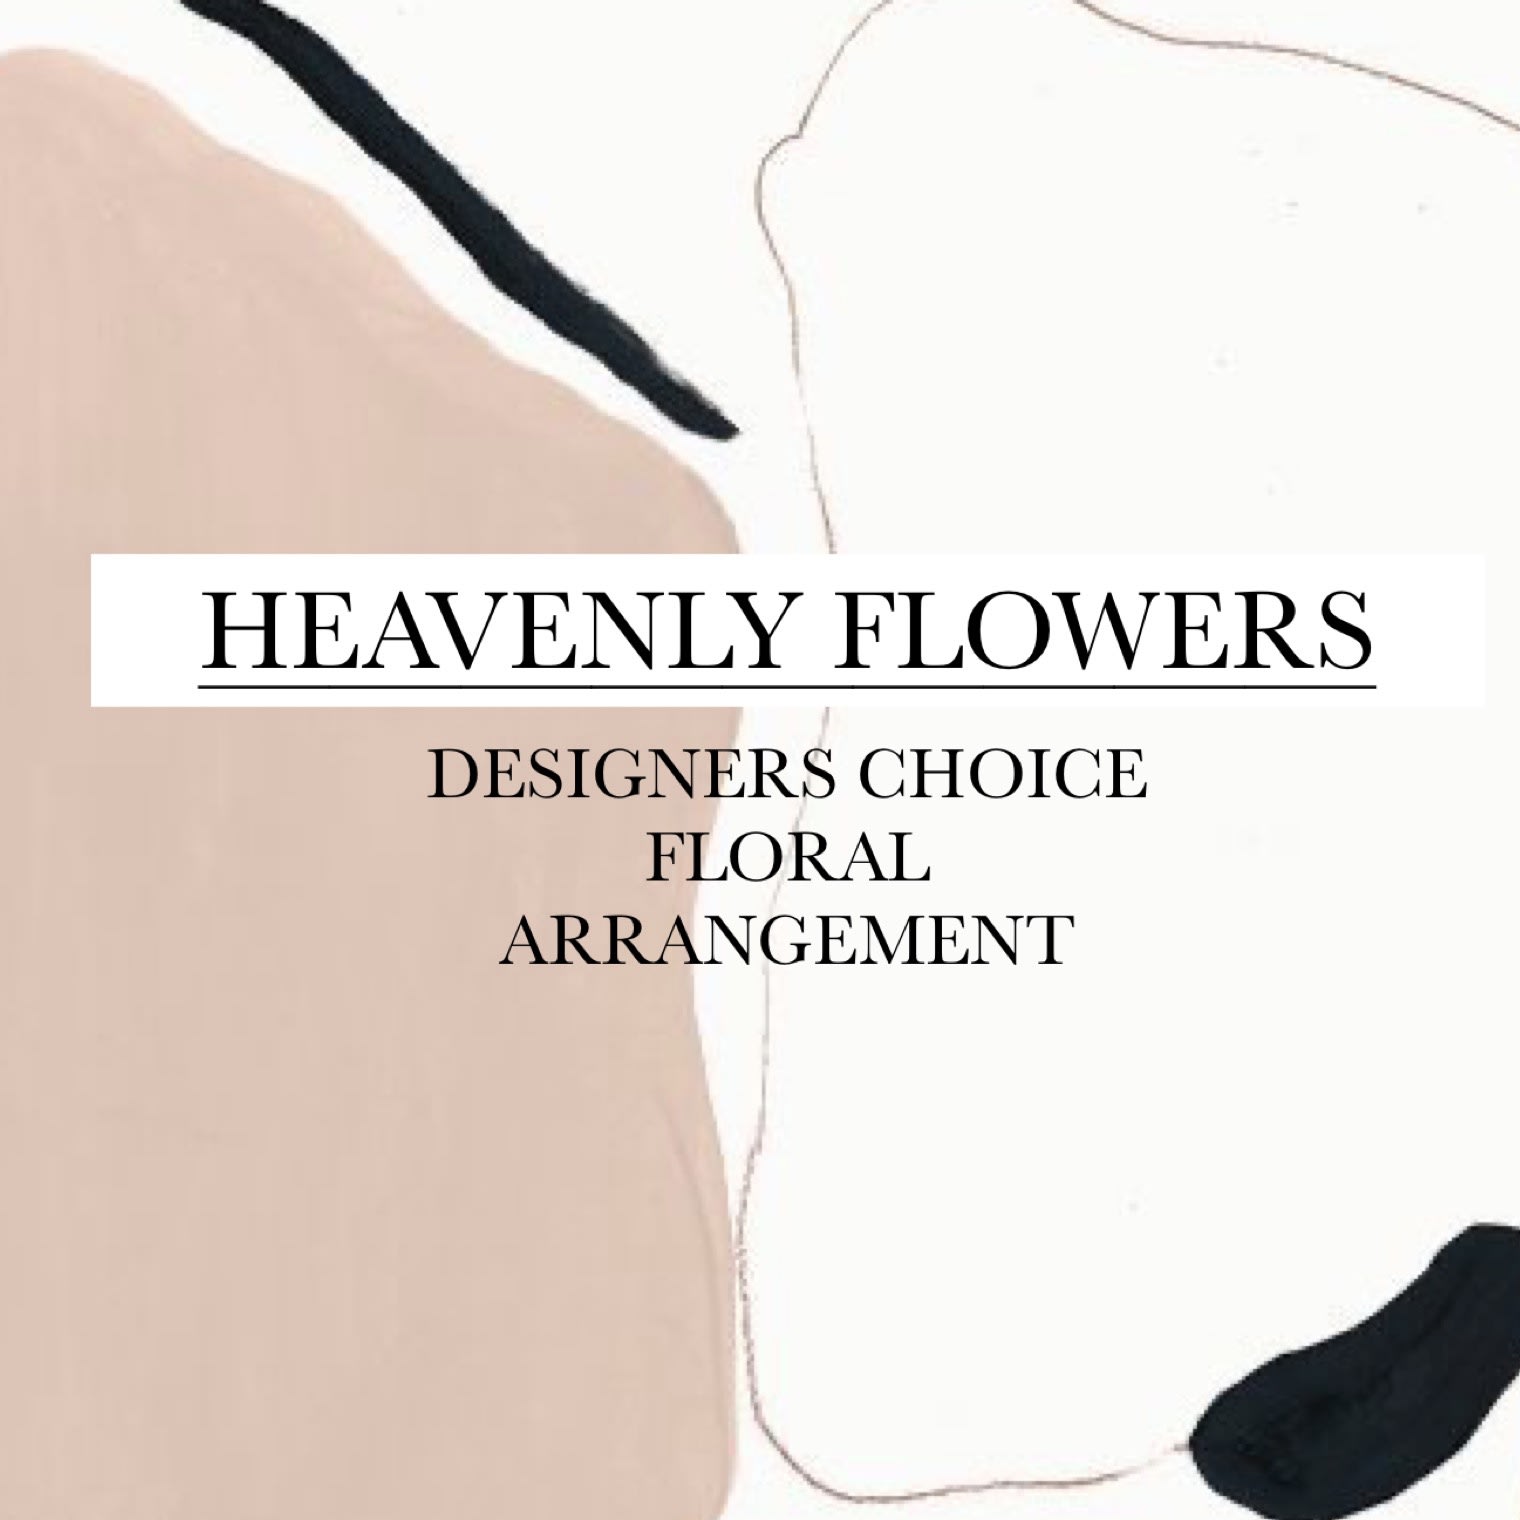 Designers Choice Premium  - Let our designers create a beautiful arrangement with the freshest blooms of the season!